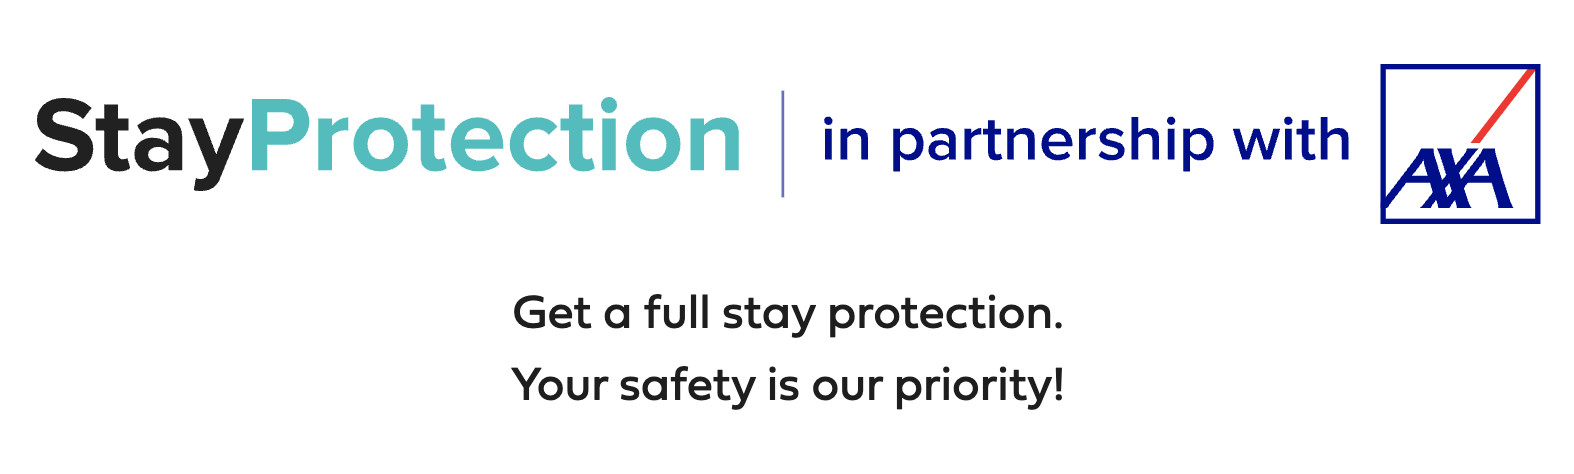 StayProtection for landlords and tenants, AXA